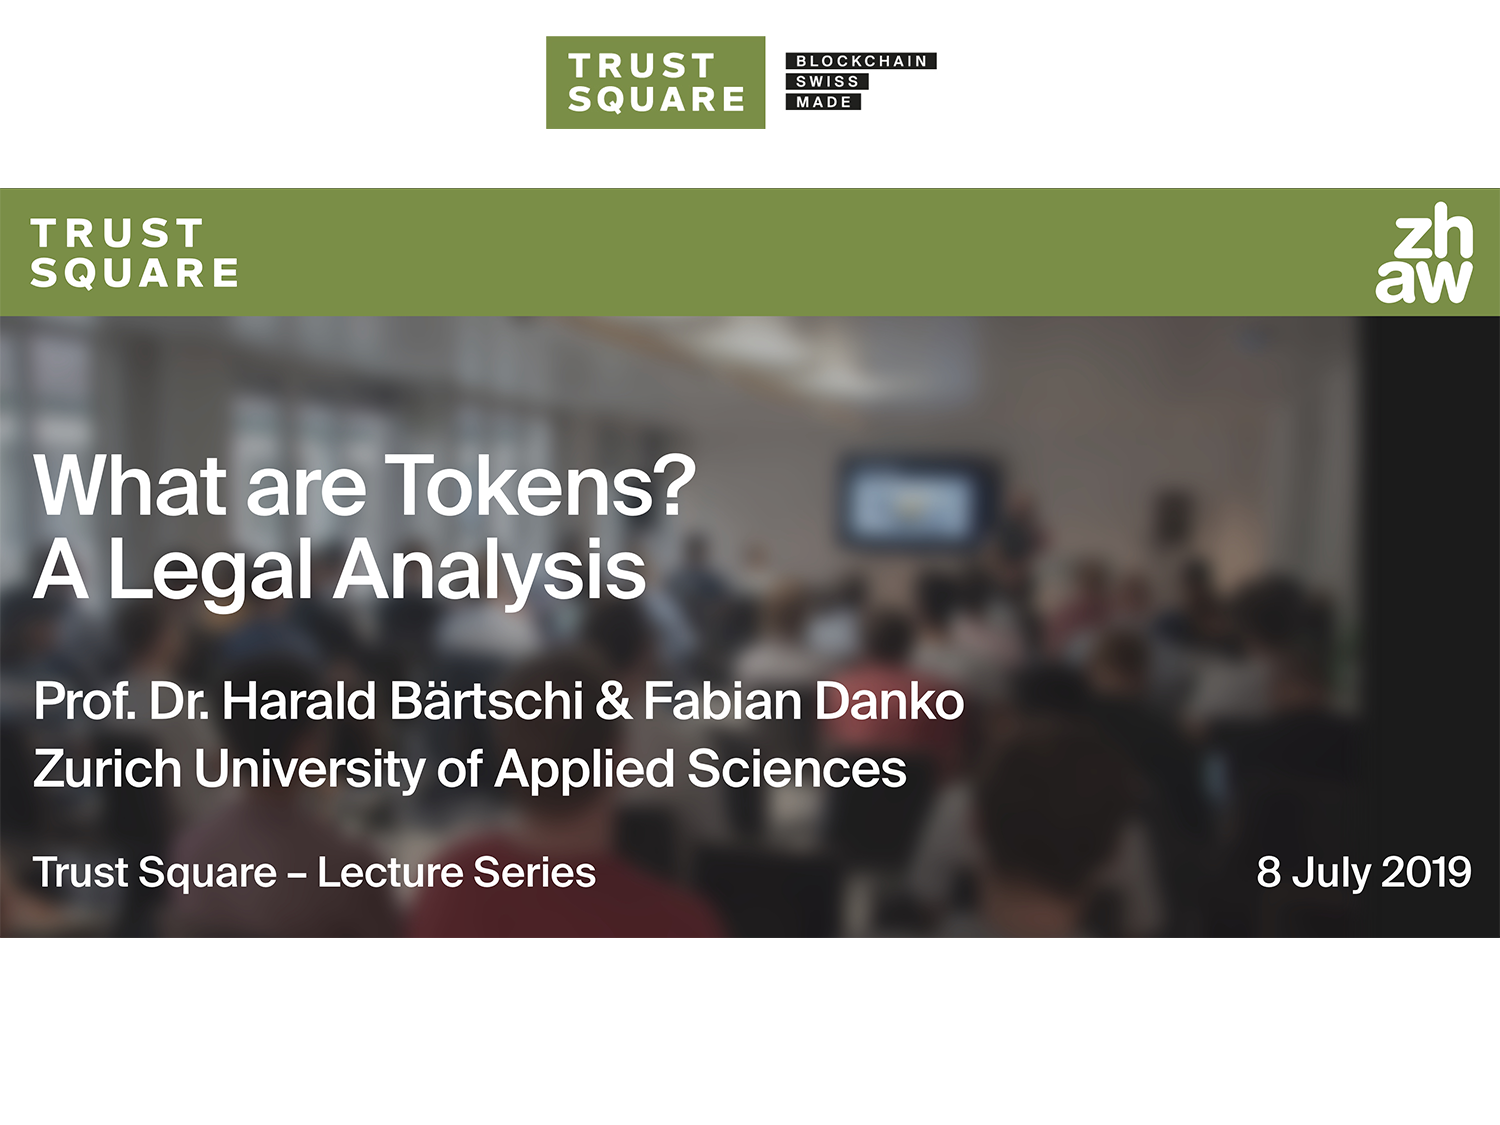 Trust Square Lecture Series - What are Tokens? A Legal Analysis, Zürich